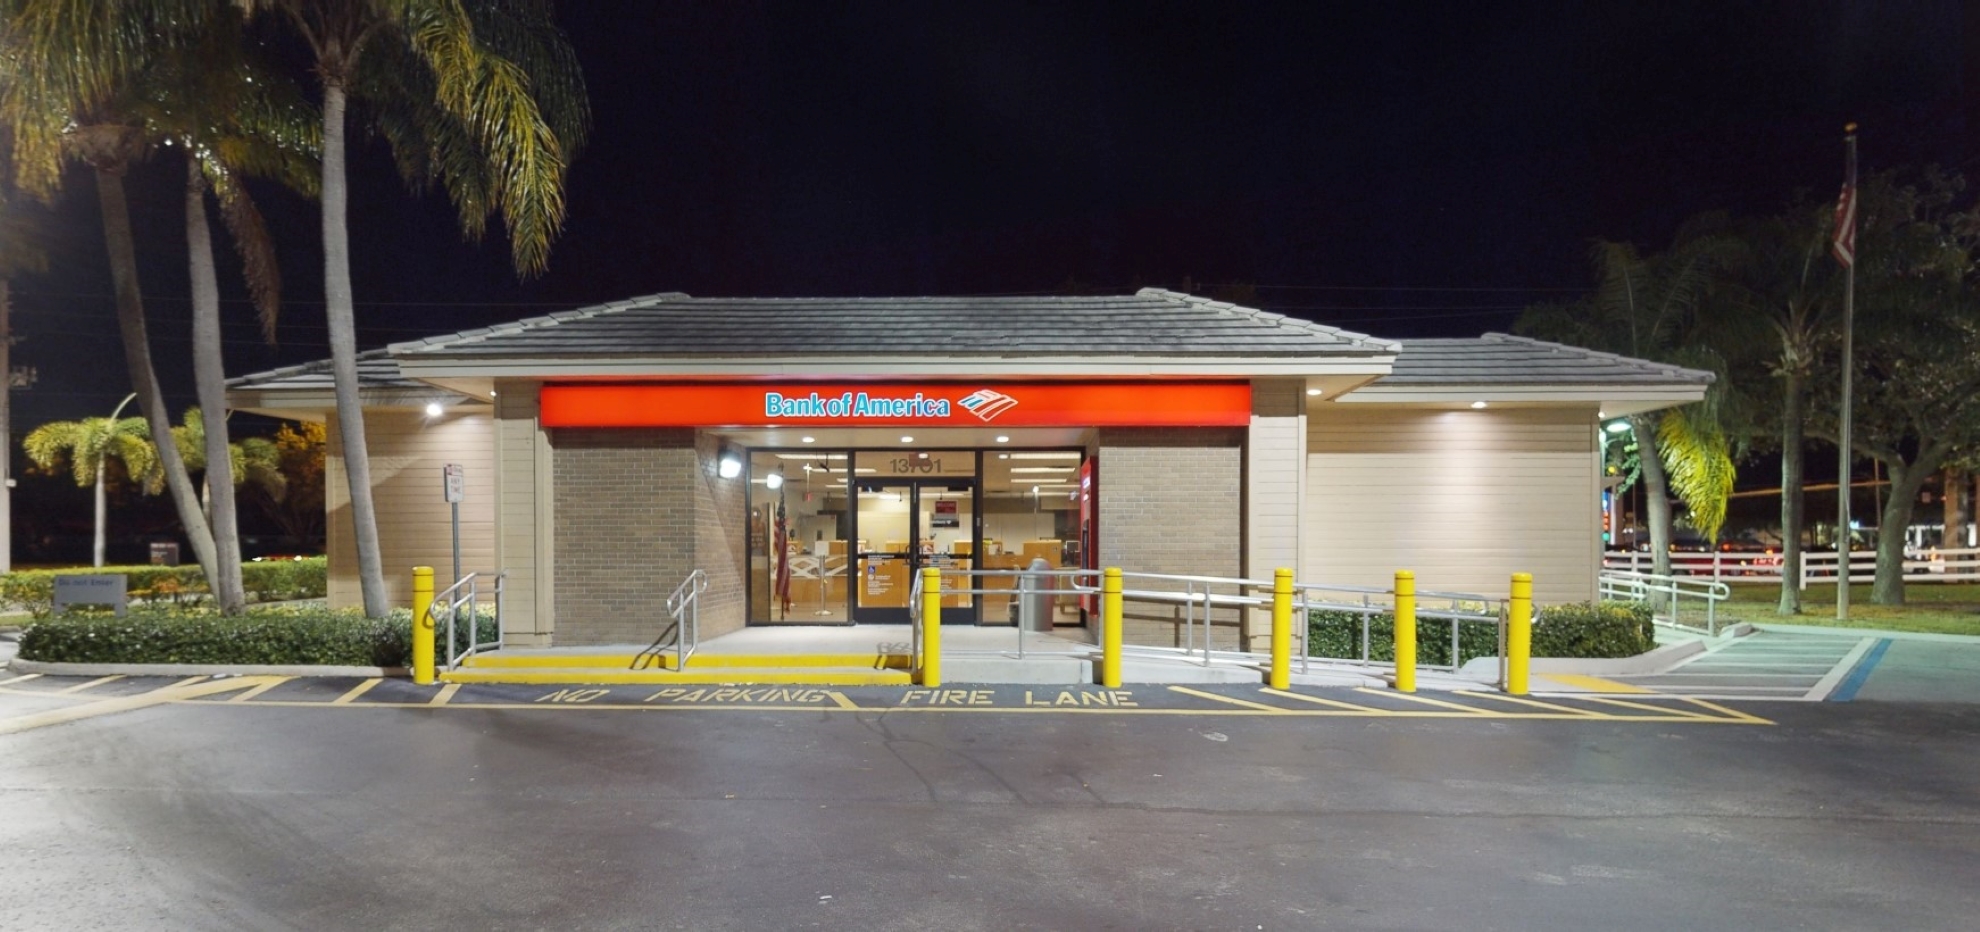 Bank of America financial center with drive-thru ATM | 13701 SW 152nd St, Miami, FL 33177